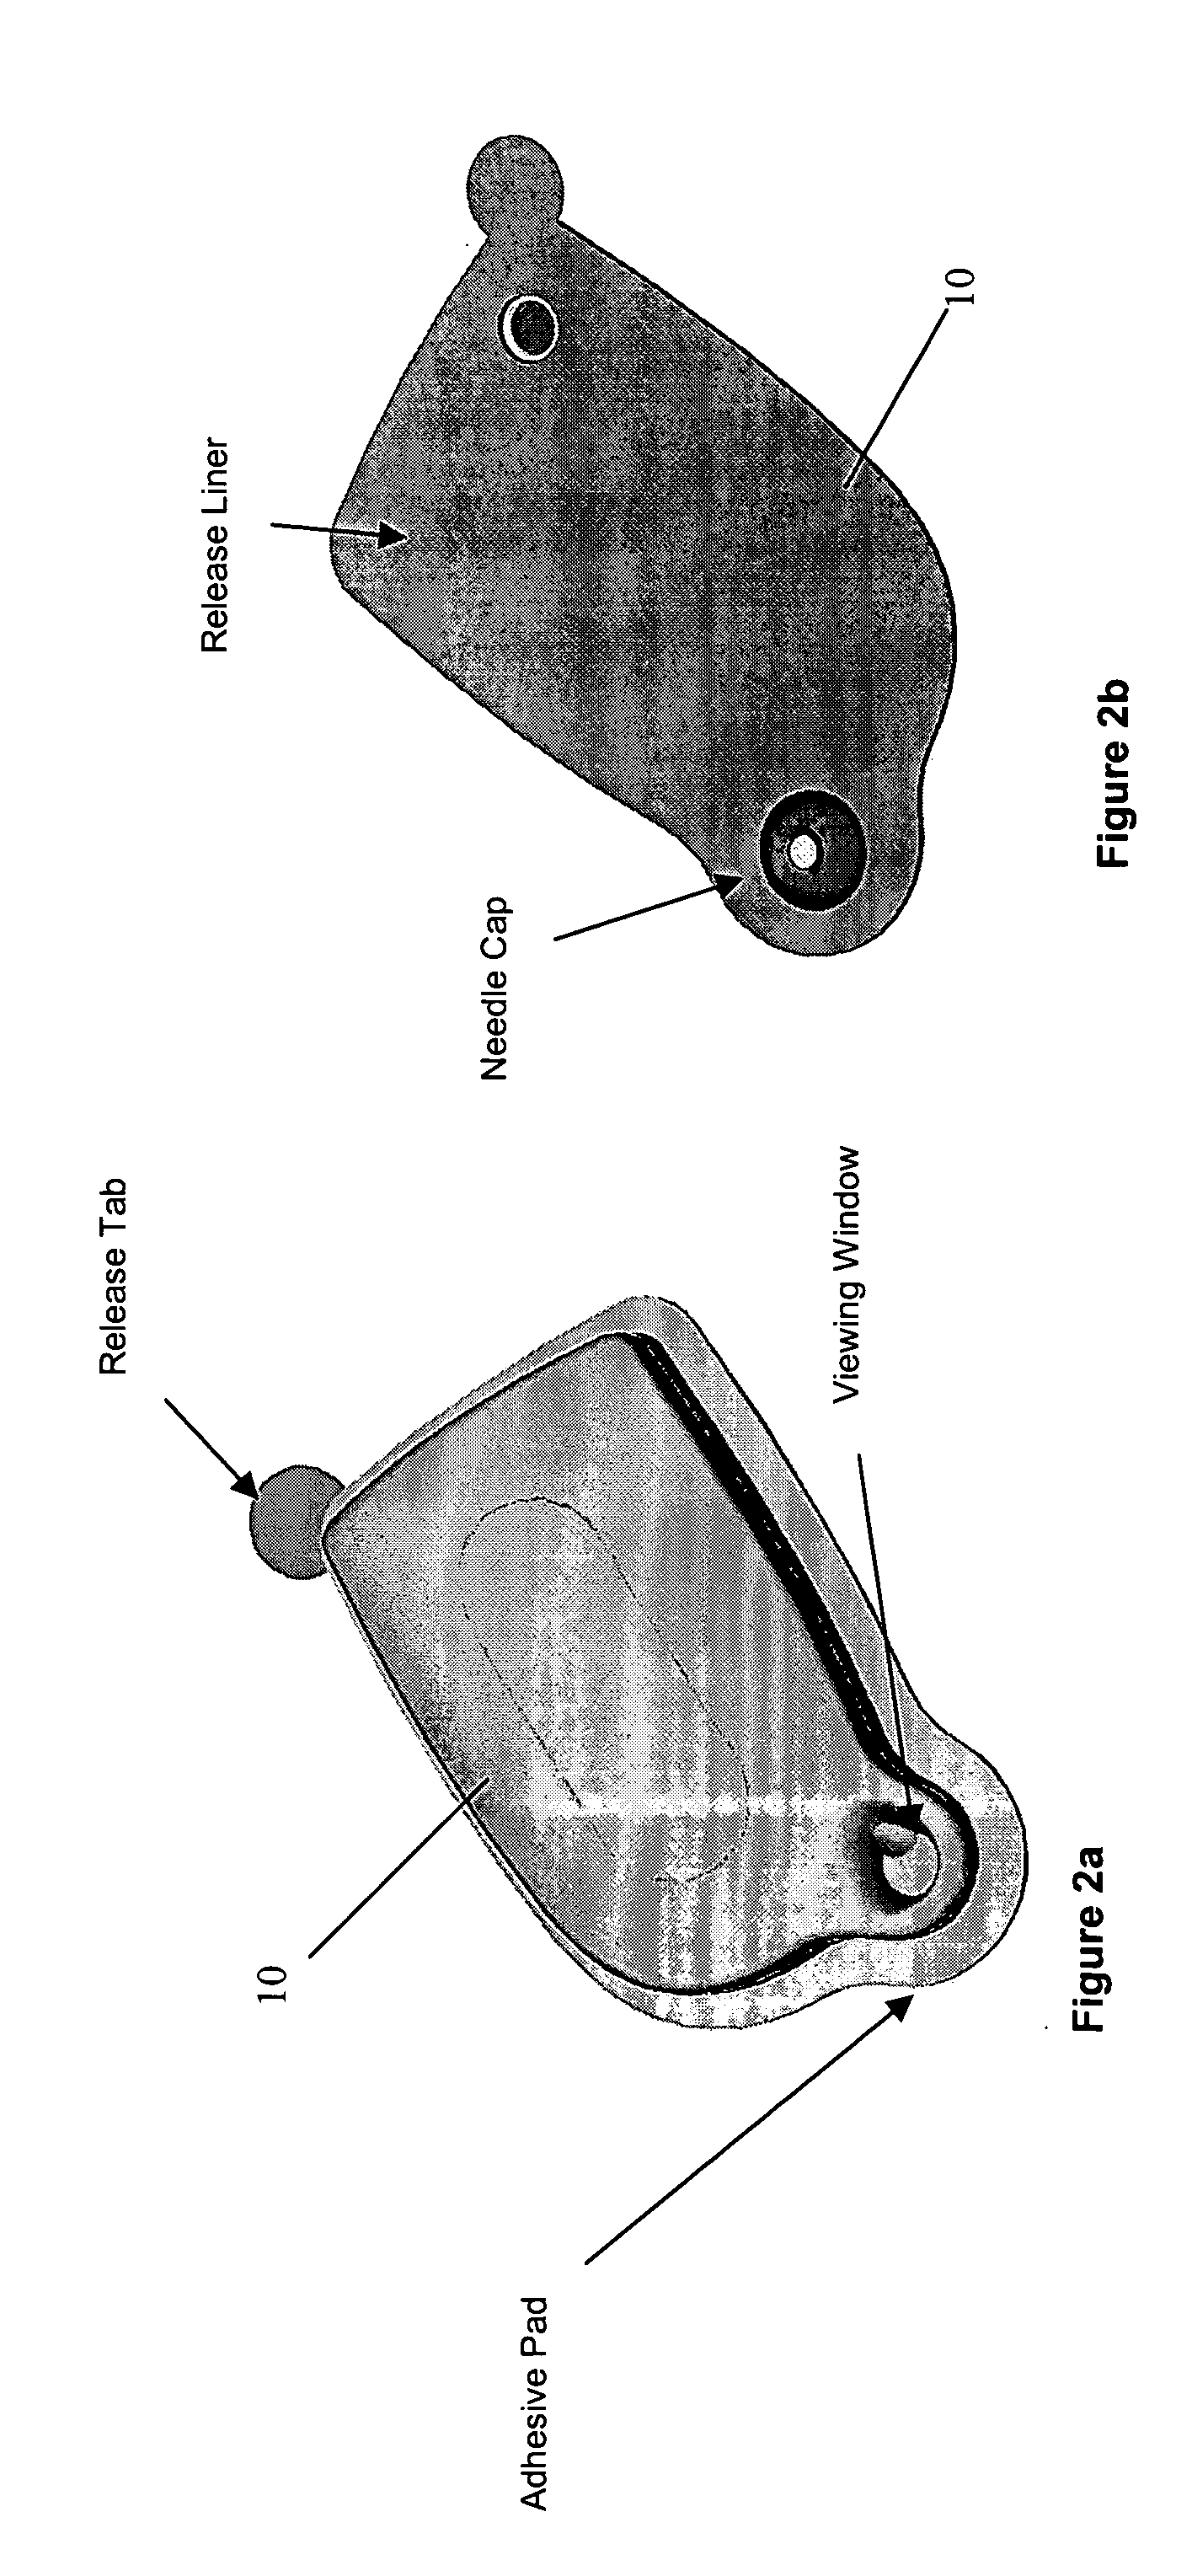 Method for advising patients concerning doses of insulin